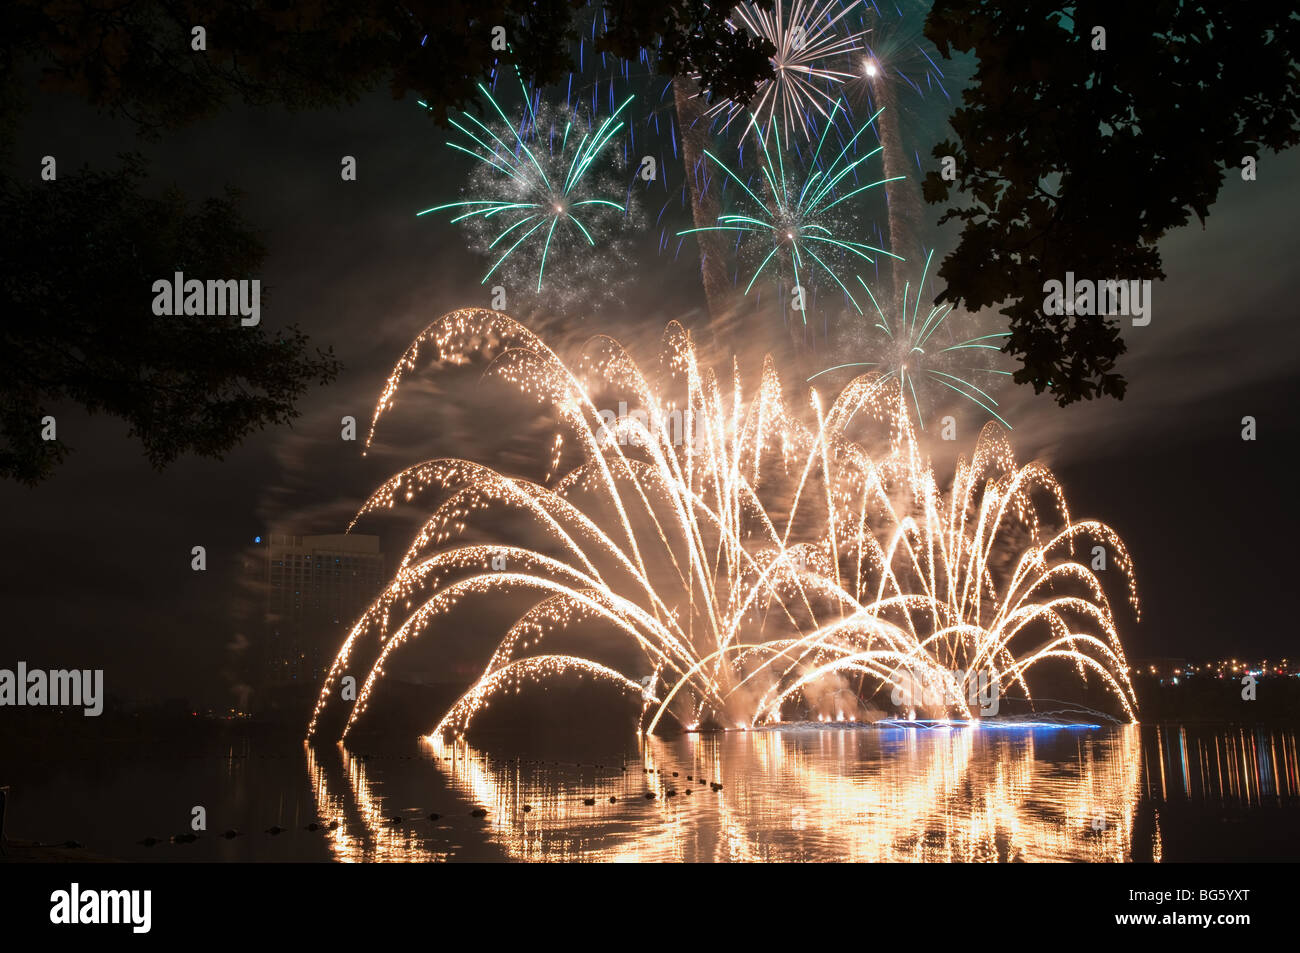 International fireworks competition aka. the "Sound of Light" at the Casino du Lac-Leamy / Hilton Hotel in Hull, Quebec, Canada. Stock Photo